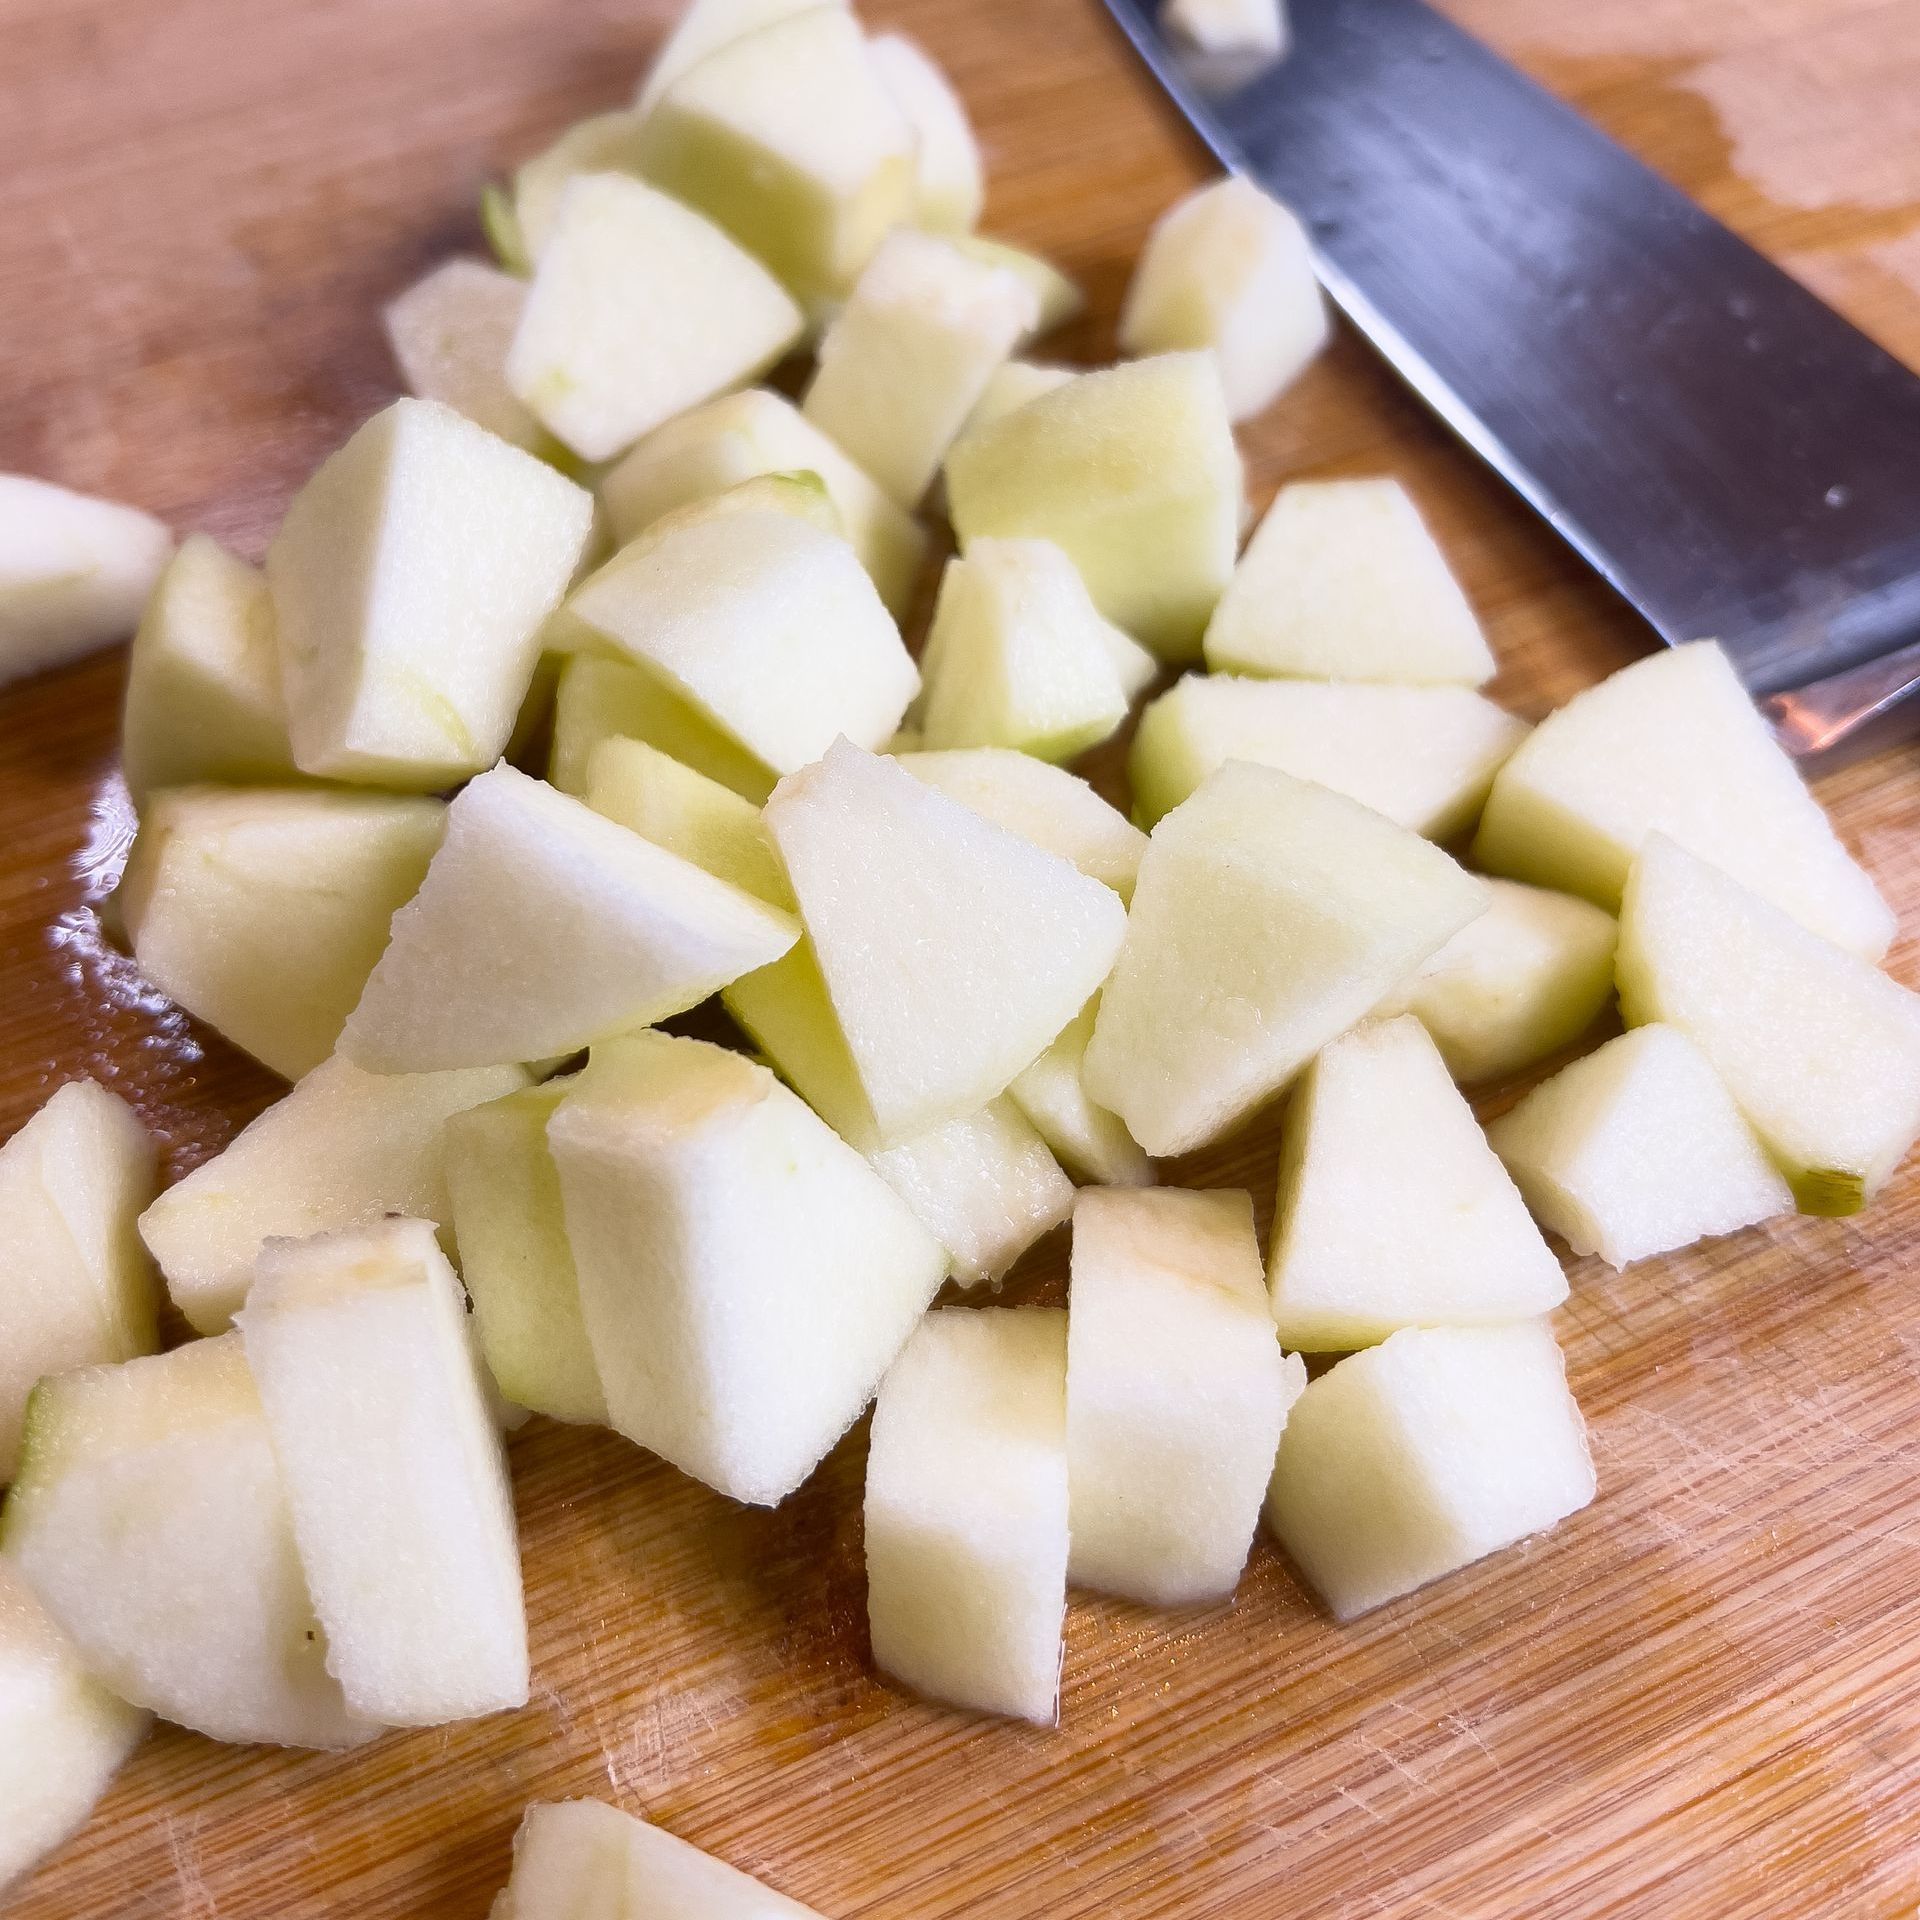 Granny Smith apples chopped on a cutting board with a knife in the background.